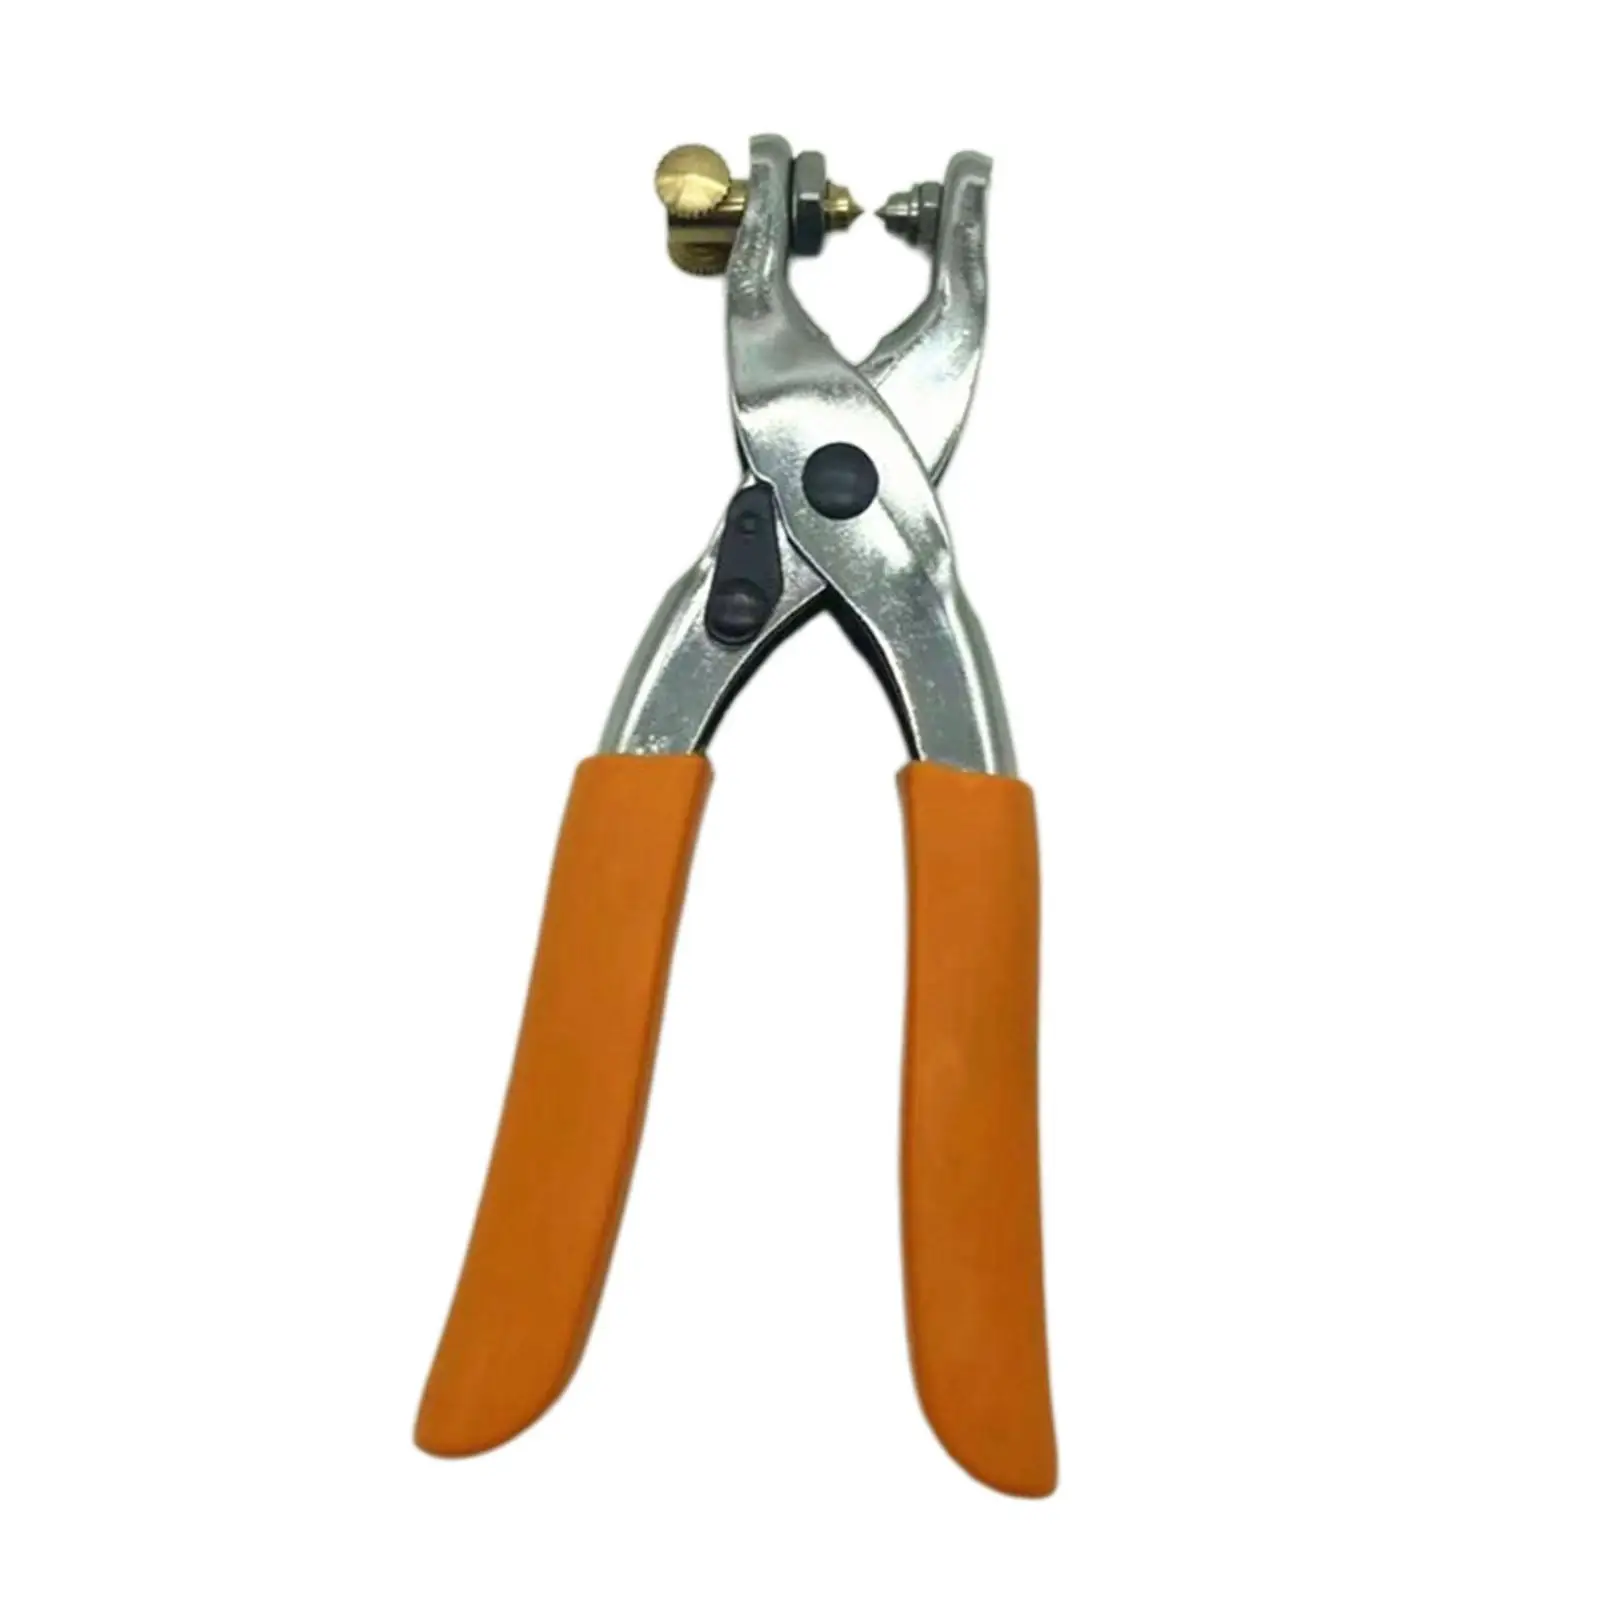 Metal Pliers for Badminton Racket String Clamp Tool Grommet Clamp Outdoor Racket Threading Pincer Forceps Replacement